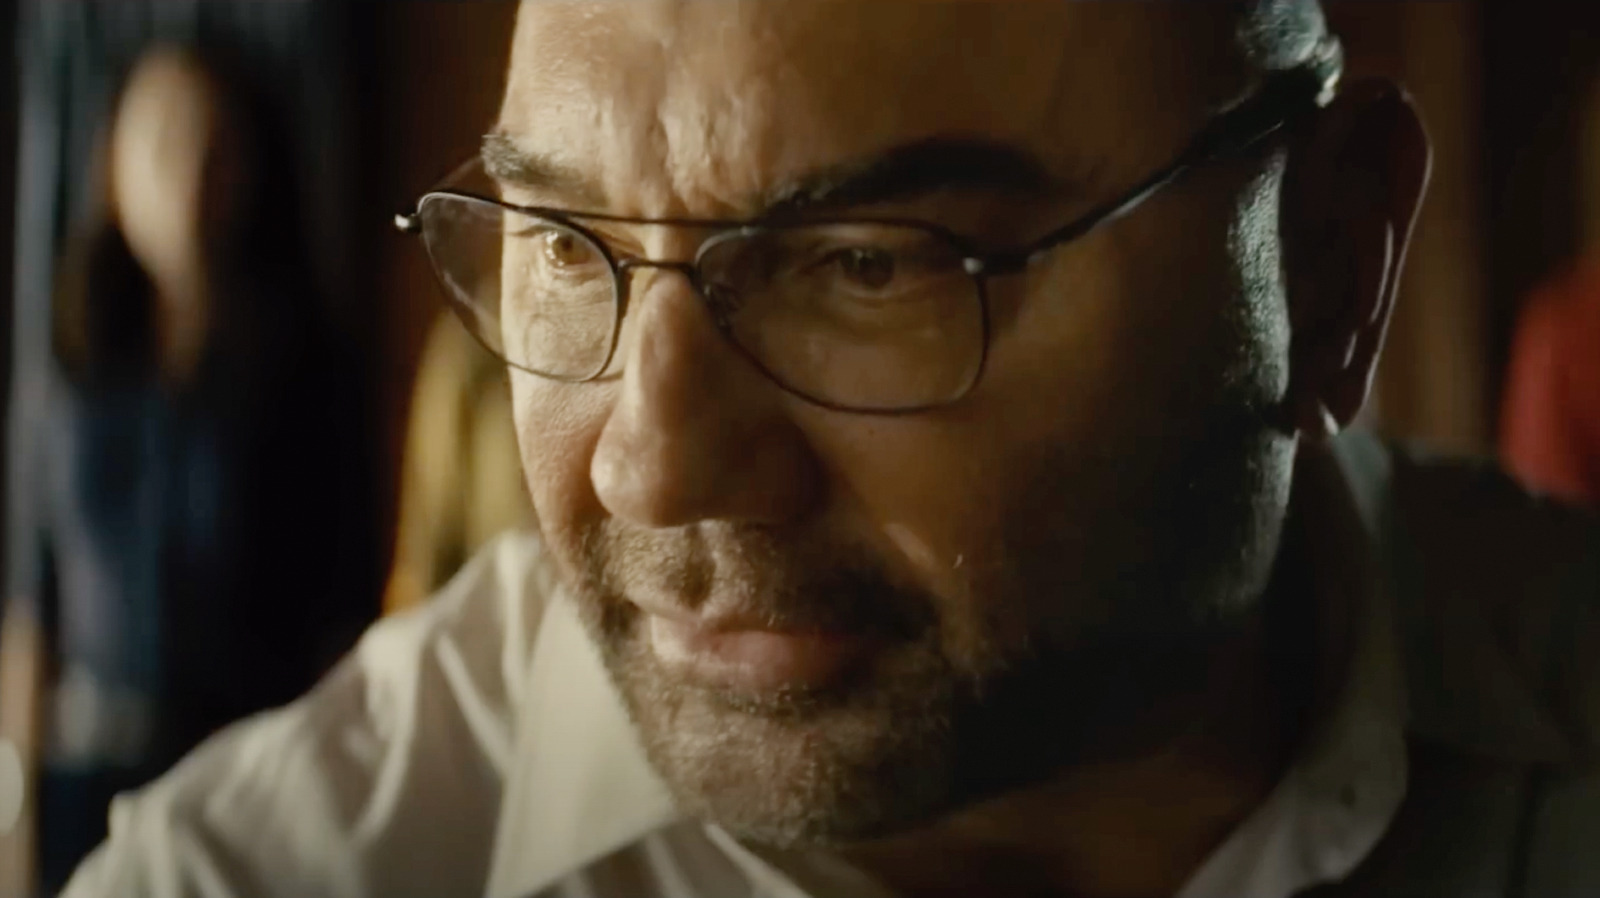 Dave Bautista: “I never wanted to be the next Rock. I just want to